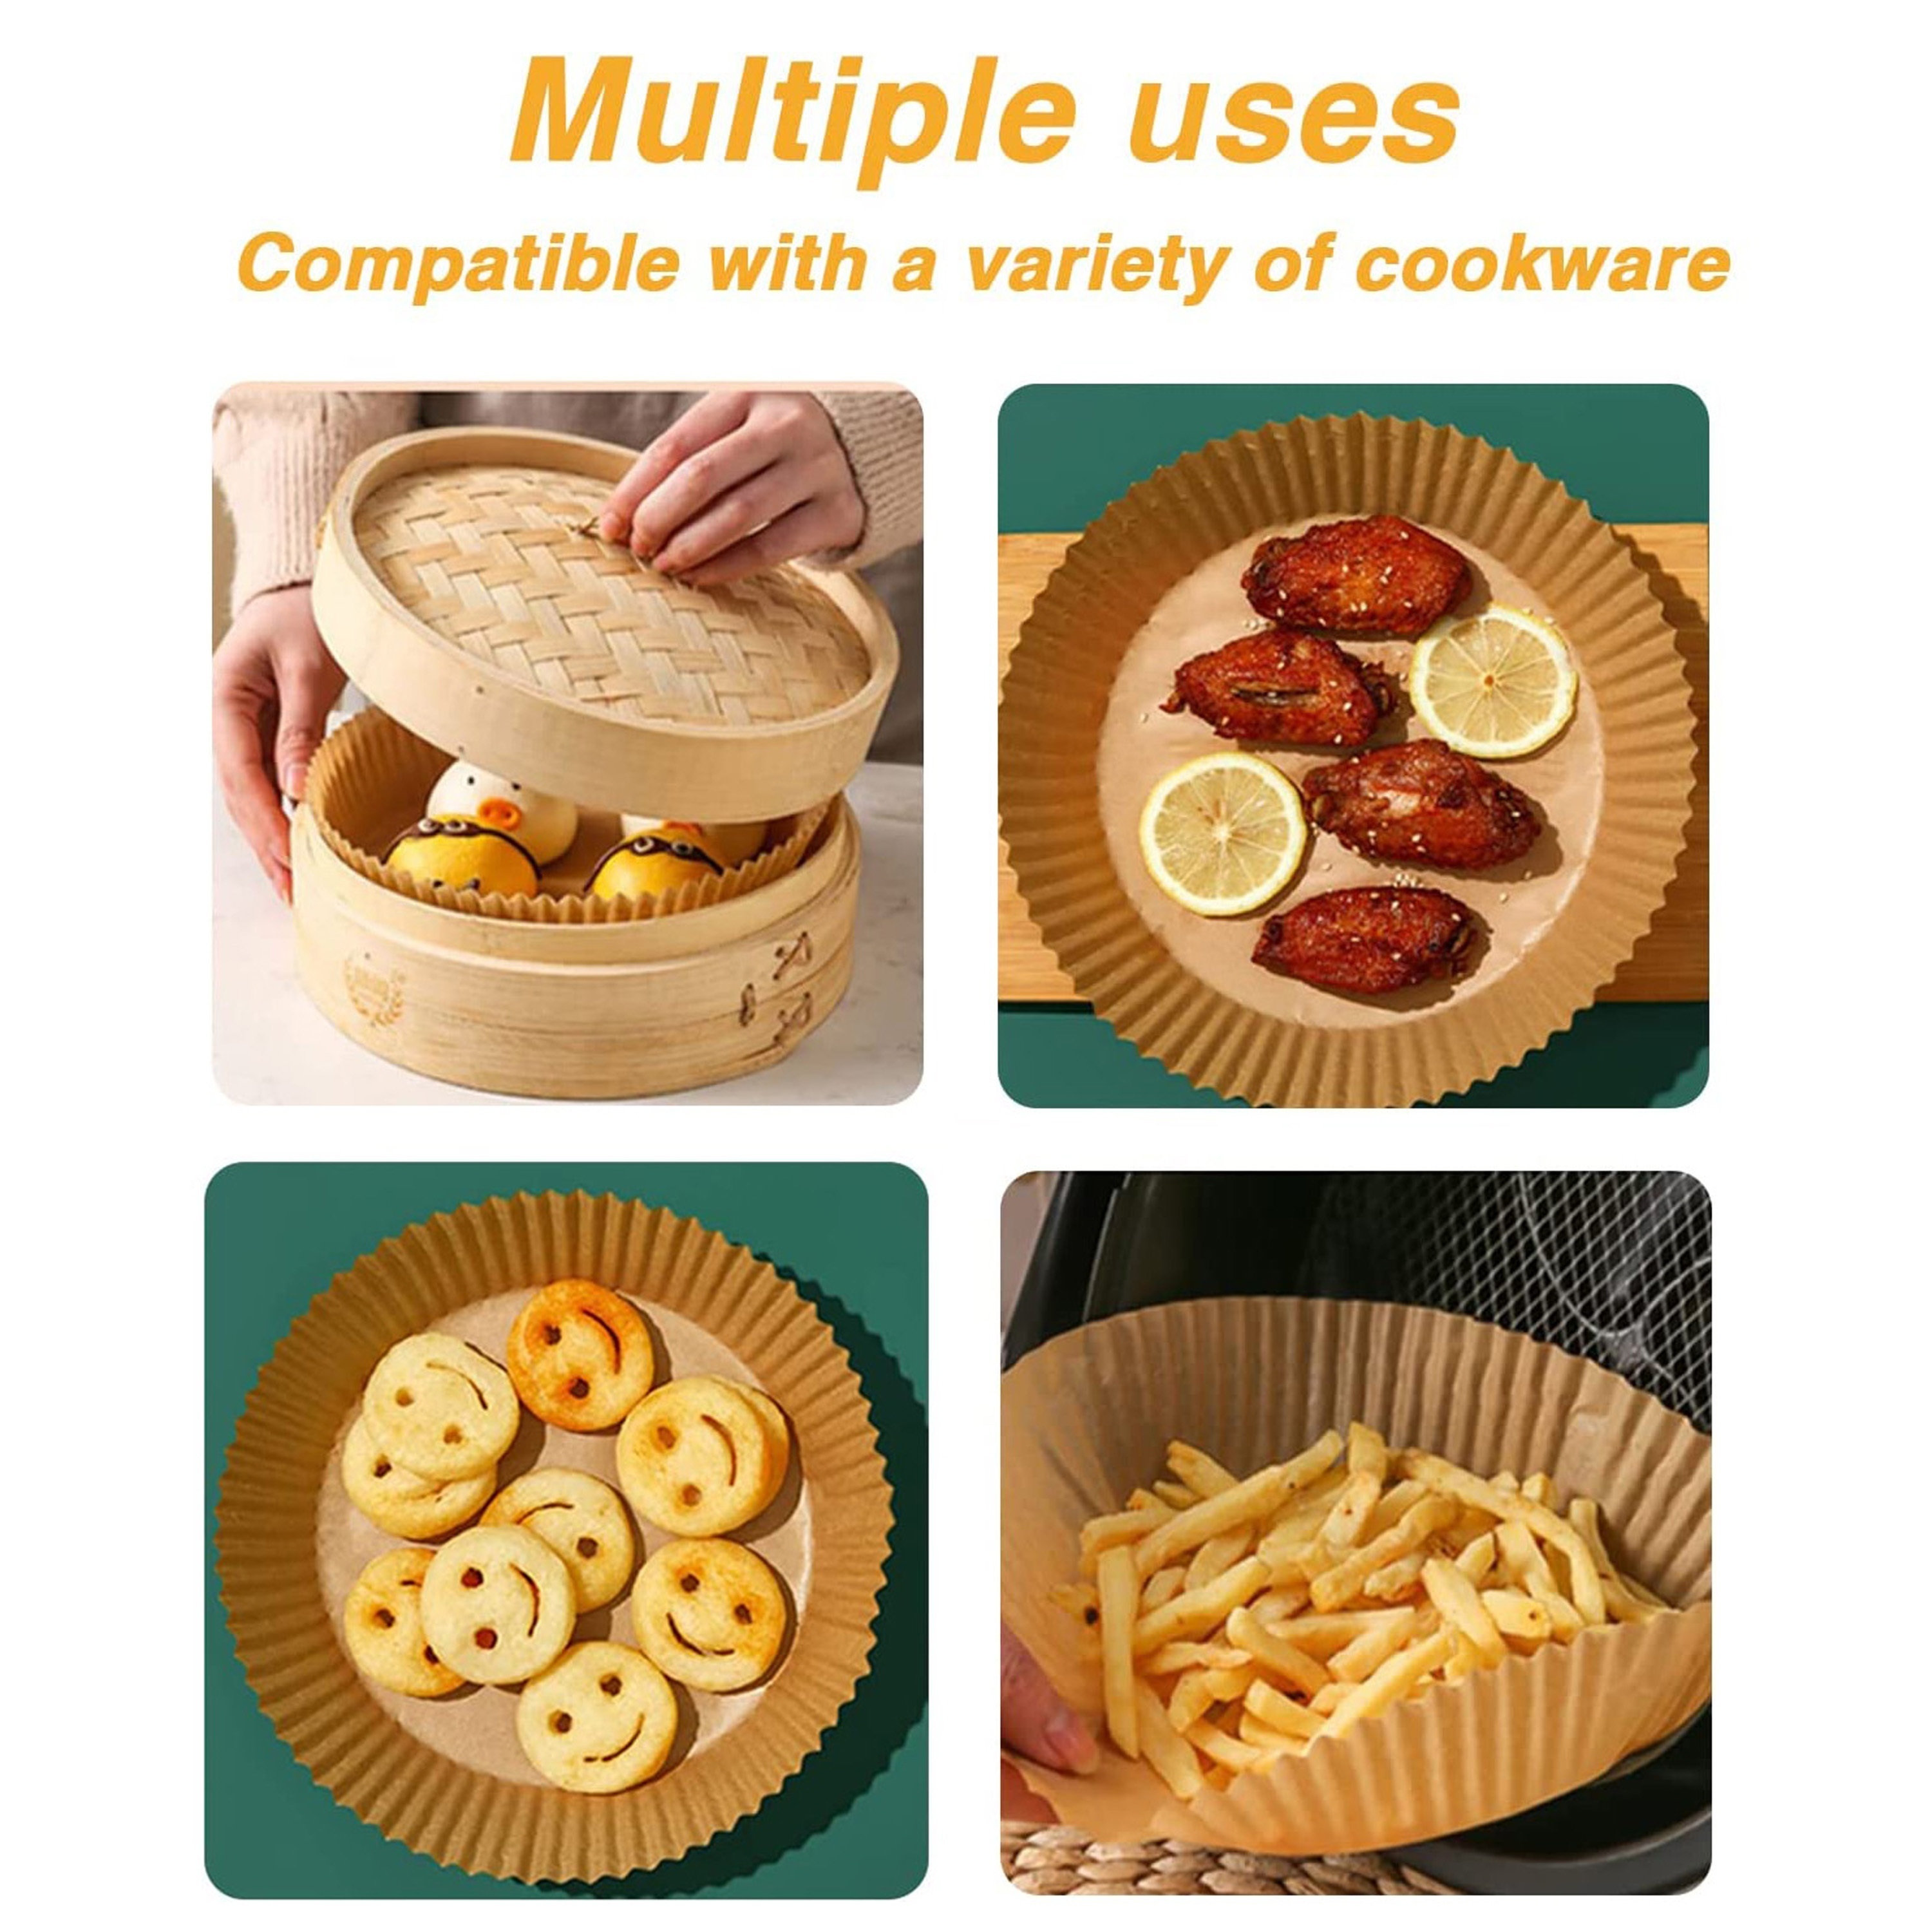 Air Fryer Paper Liners Disposable: 300pcs Oil Proof Parchment Sheets Round, Airfryer  Paper Basket Bowl Liner for Baking Cooking Food 